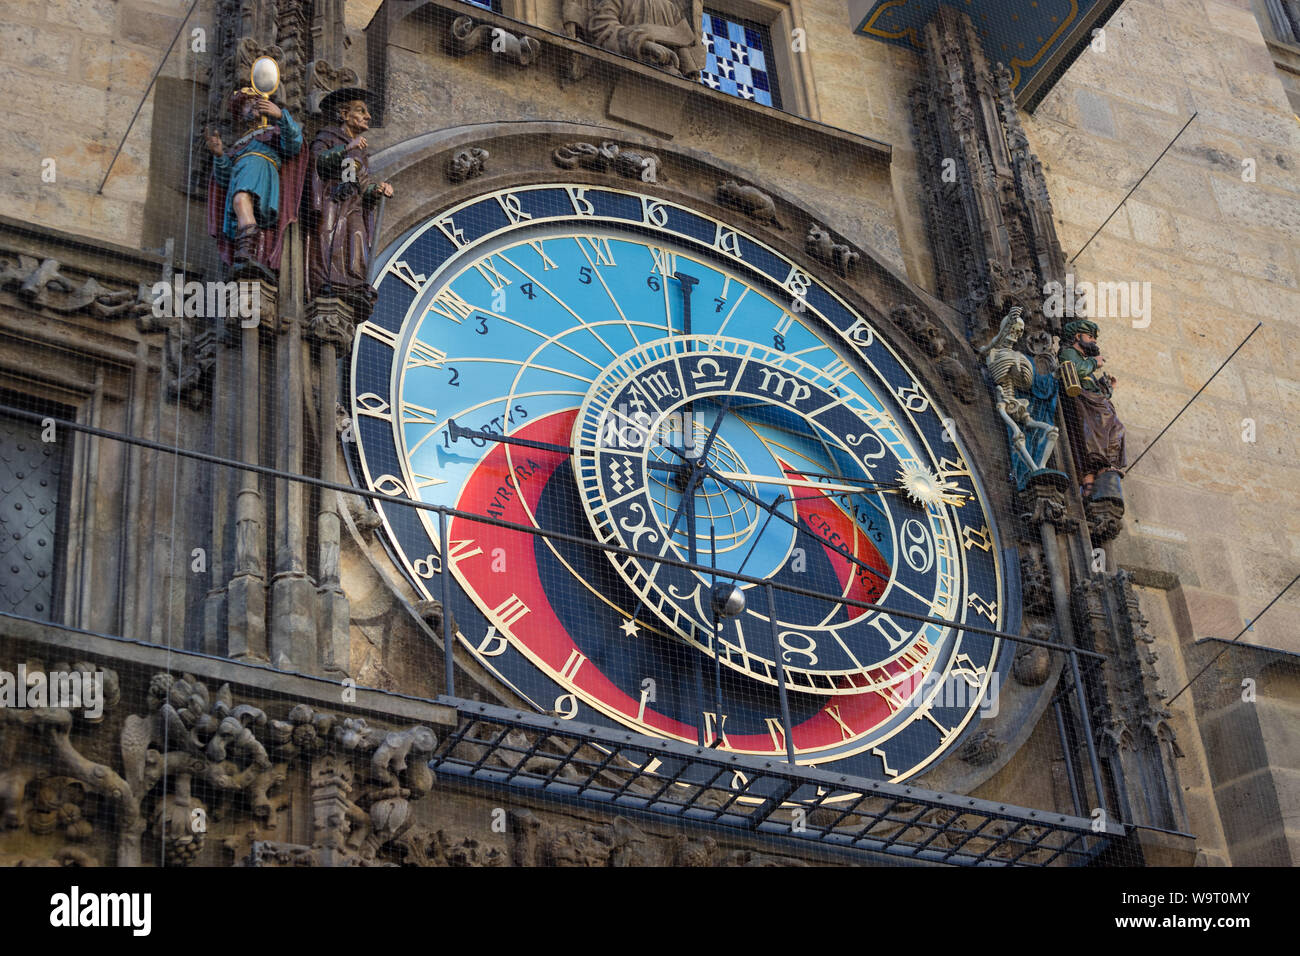 Astronomic clock on the Old Town Hall tower at Staromestska square in Prague Stock Photo